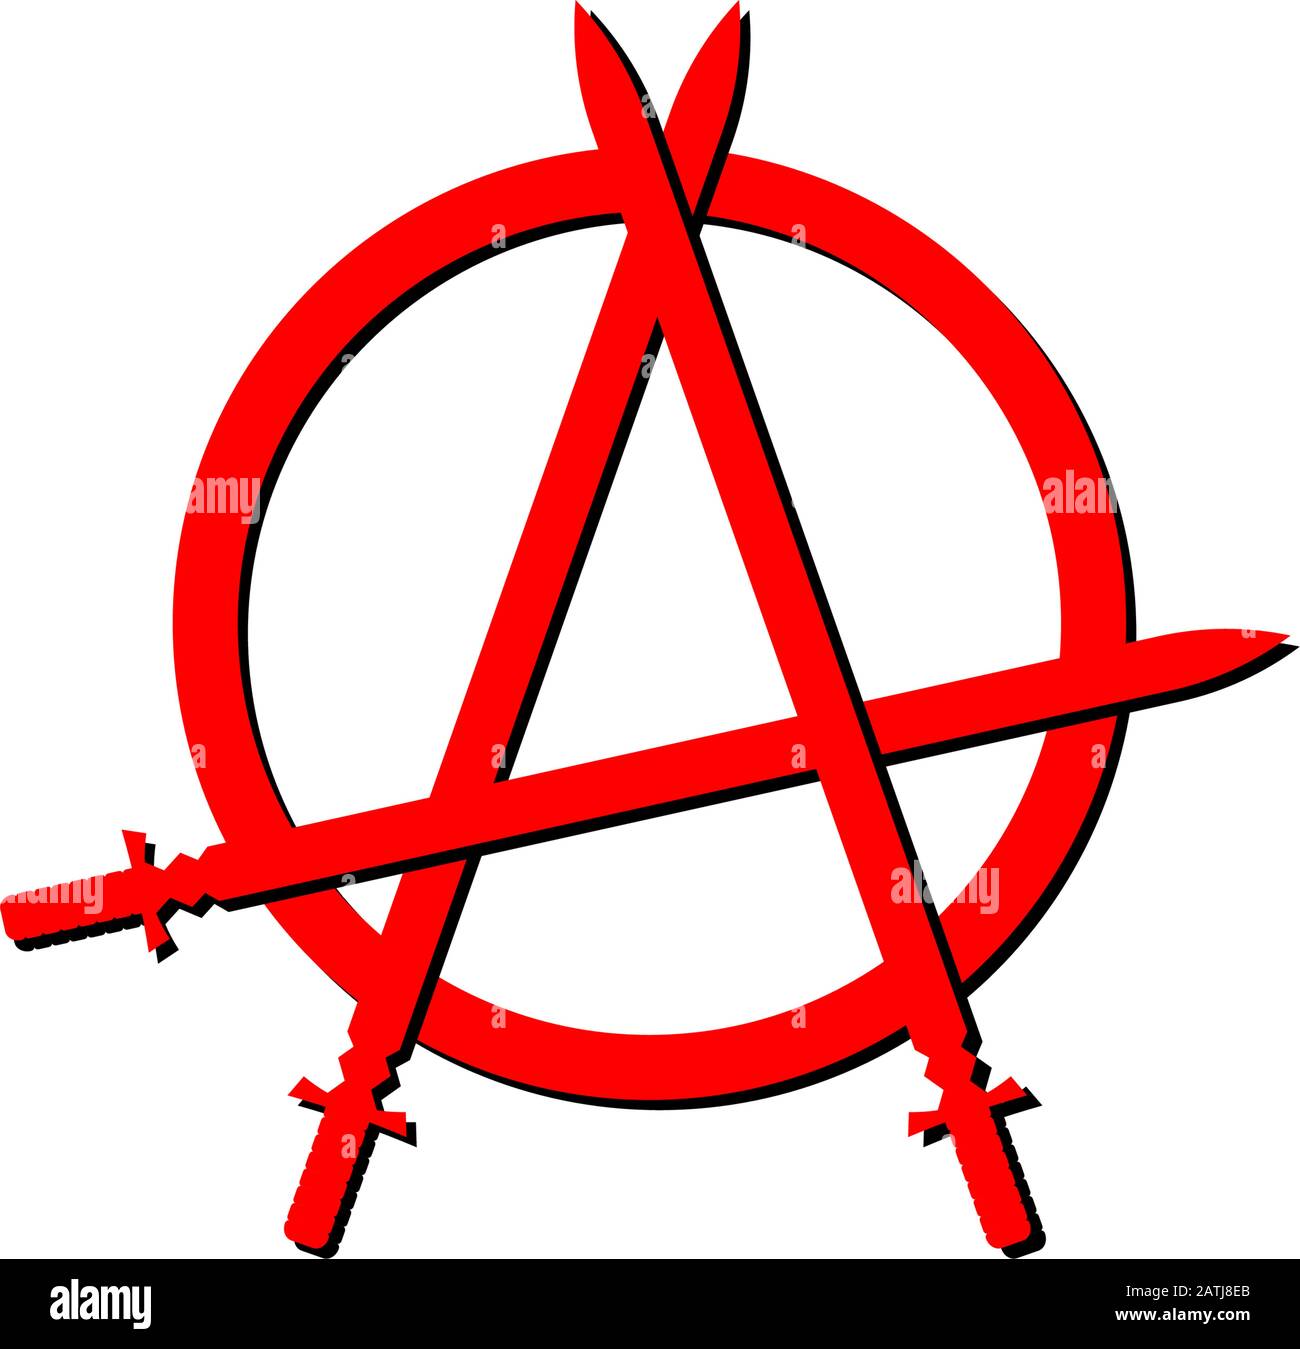 Red Anarchy Sign illustration with Three Sword Shape Element, EPS 10 Vector file Stock Vector